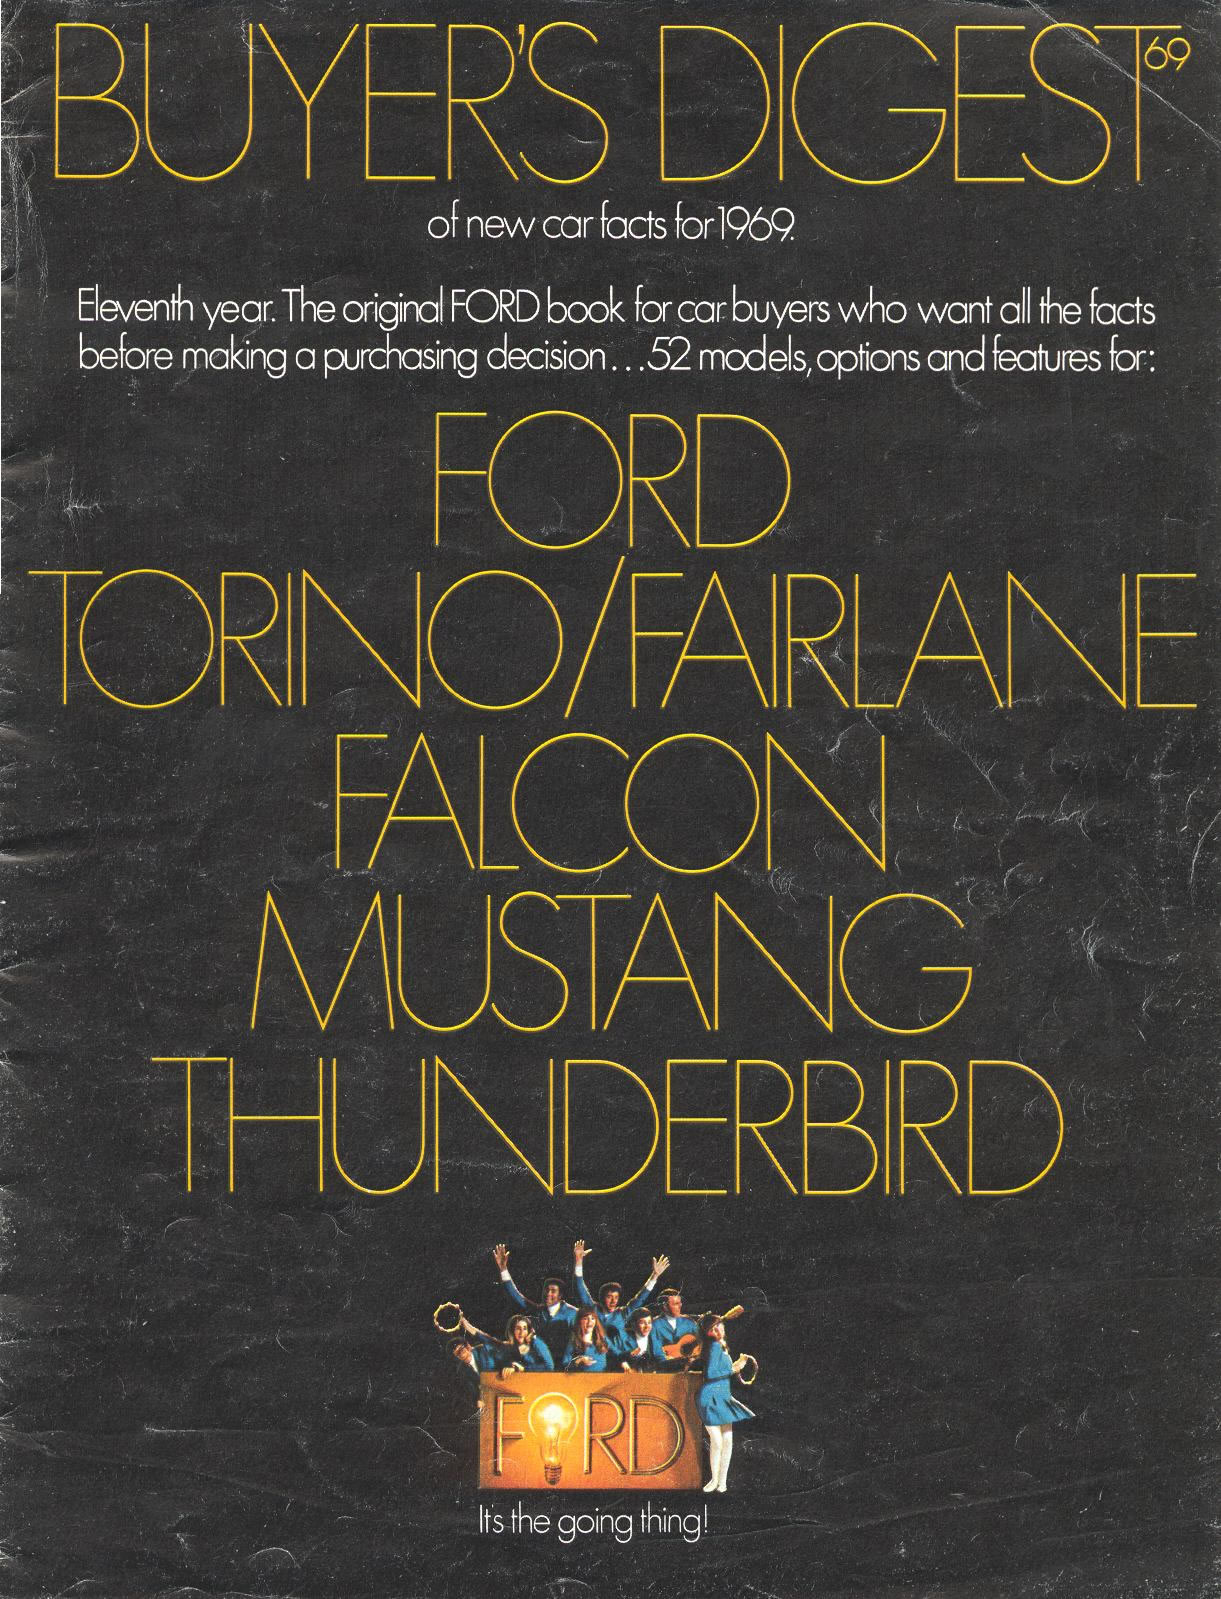 1969 Ford Buyers Digest Page 12